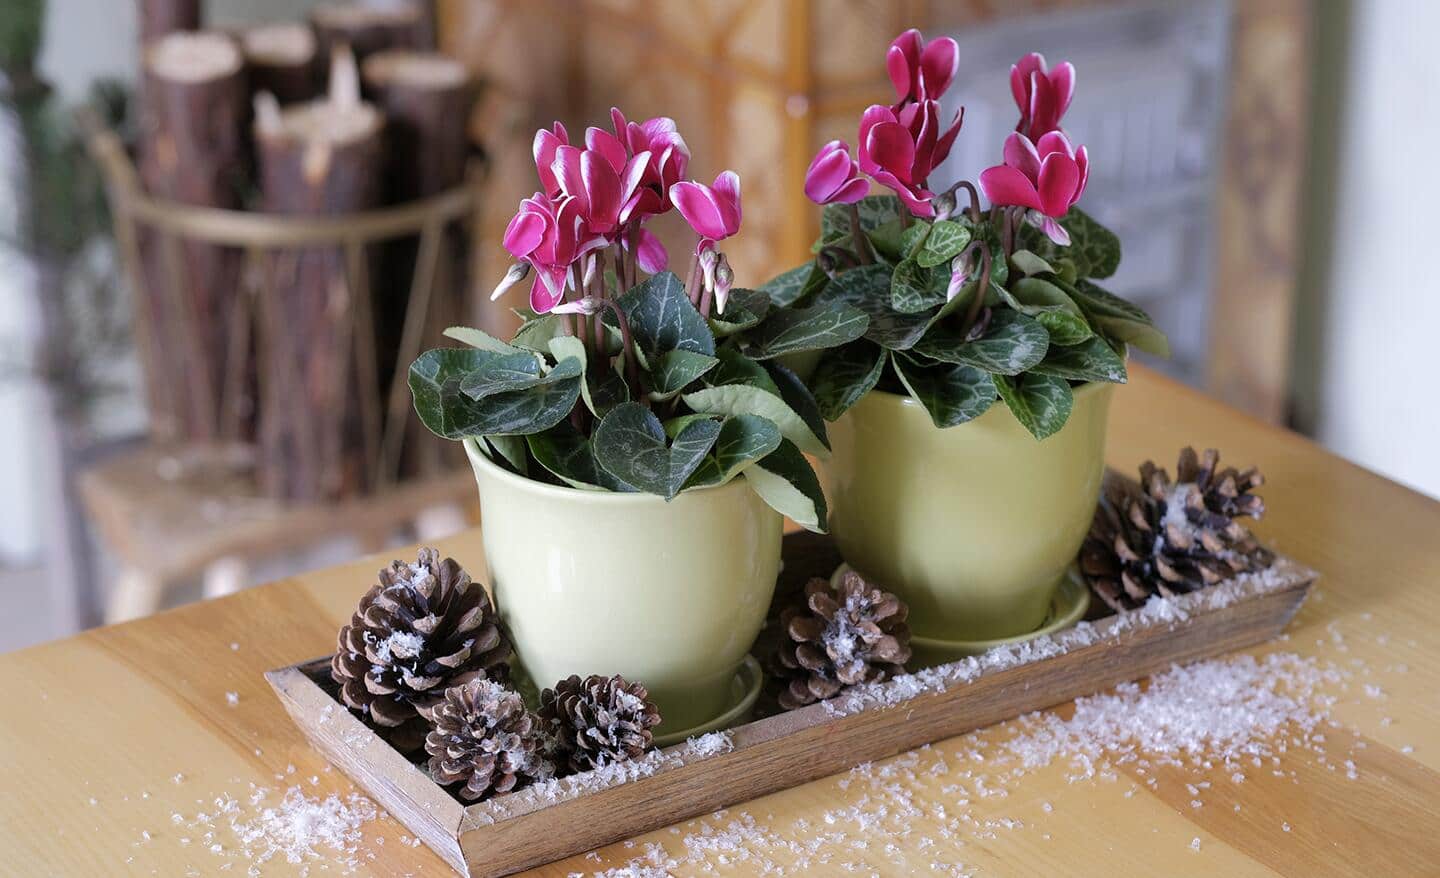 A pair of cyclamen plants on a holiday tray with pine cones